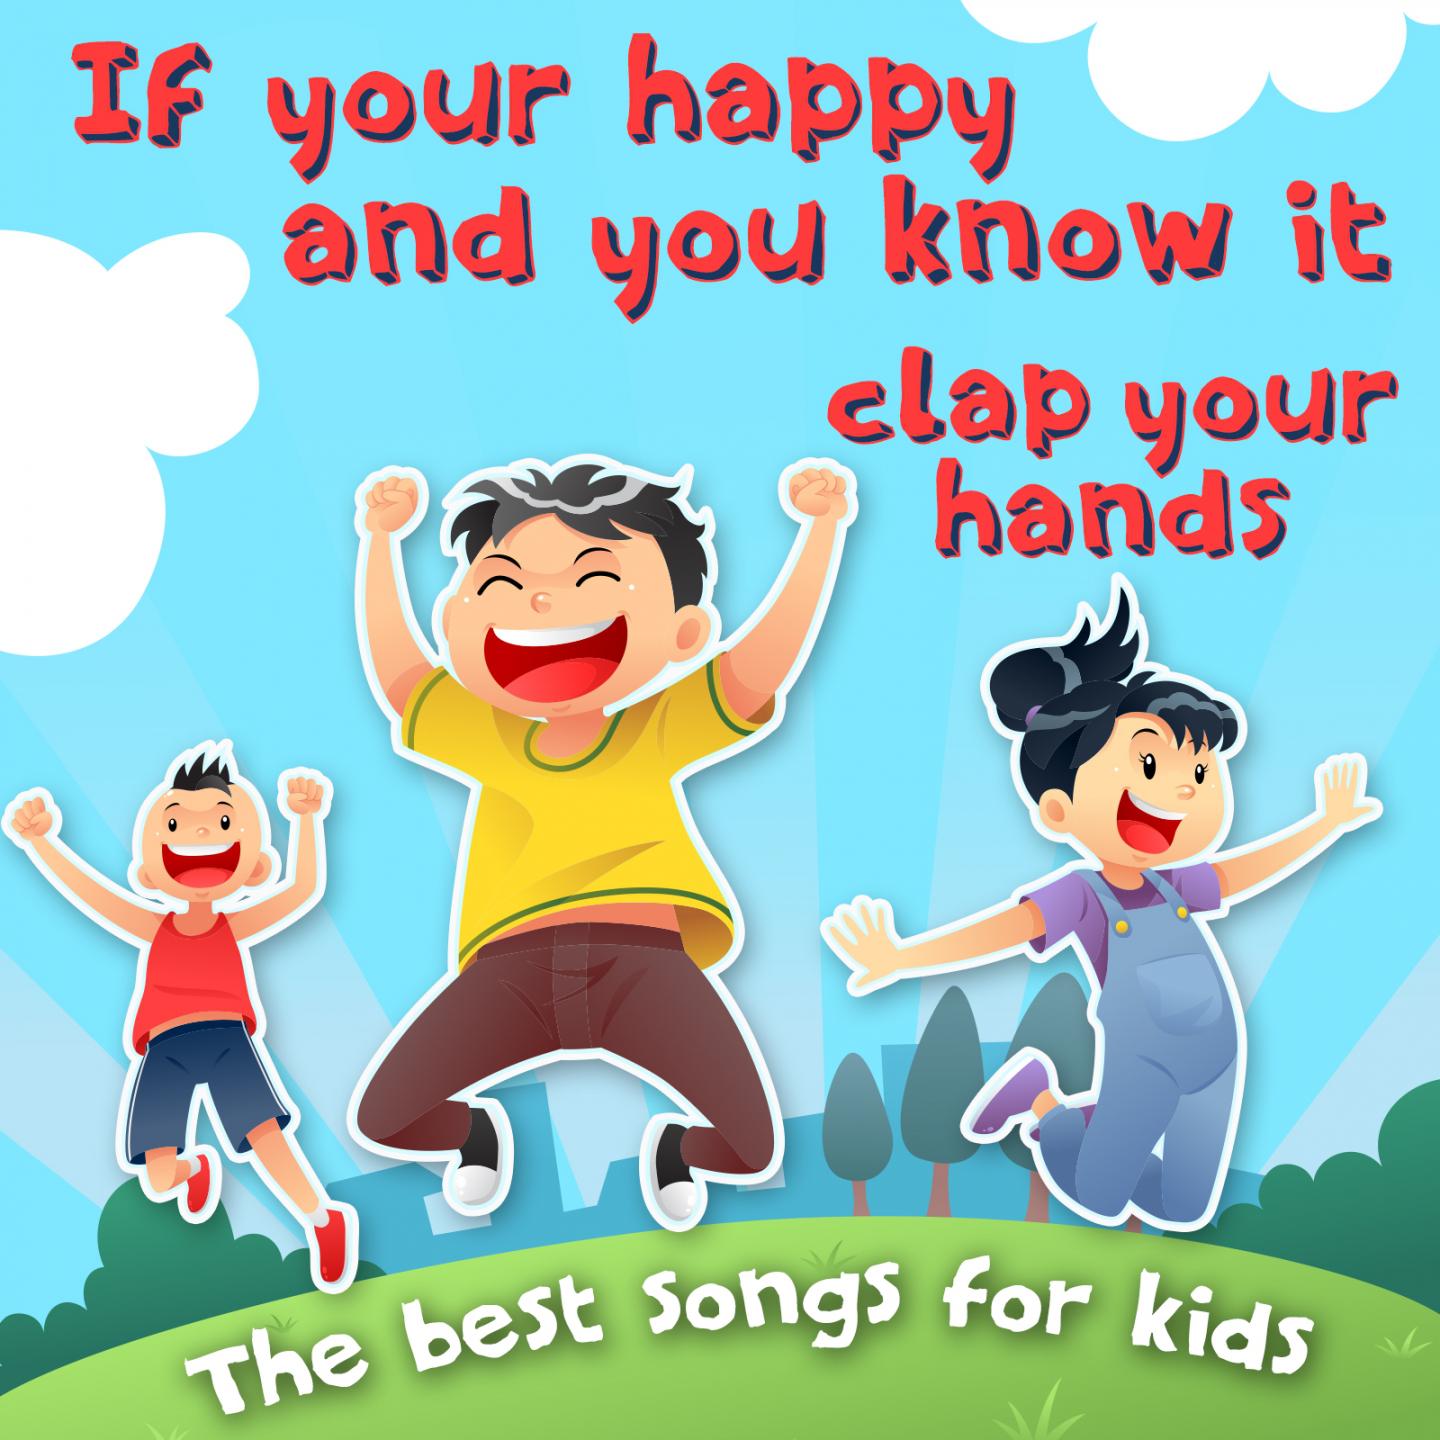 If You're Happy and You Know It (Clap Your Hands) (The Best Songs for Kids)